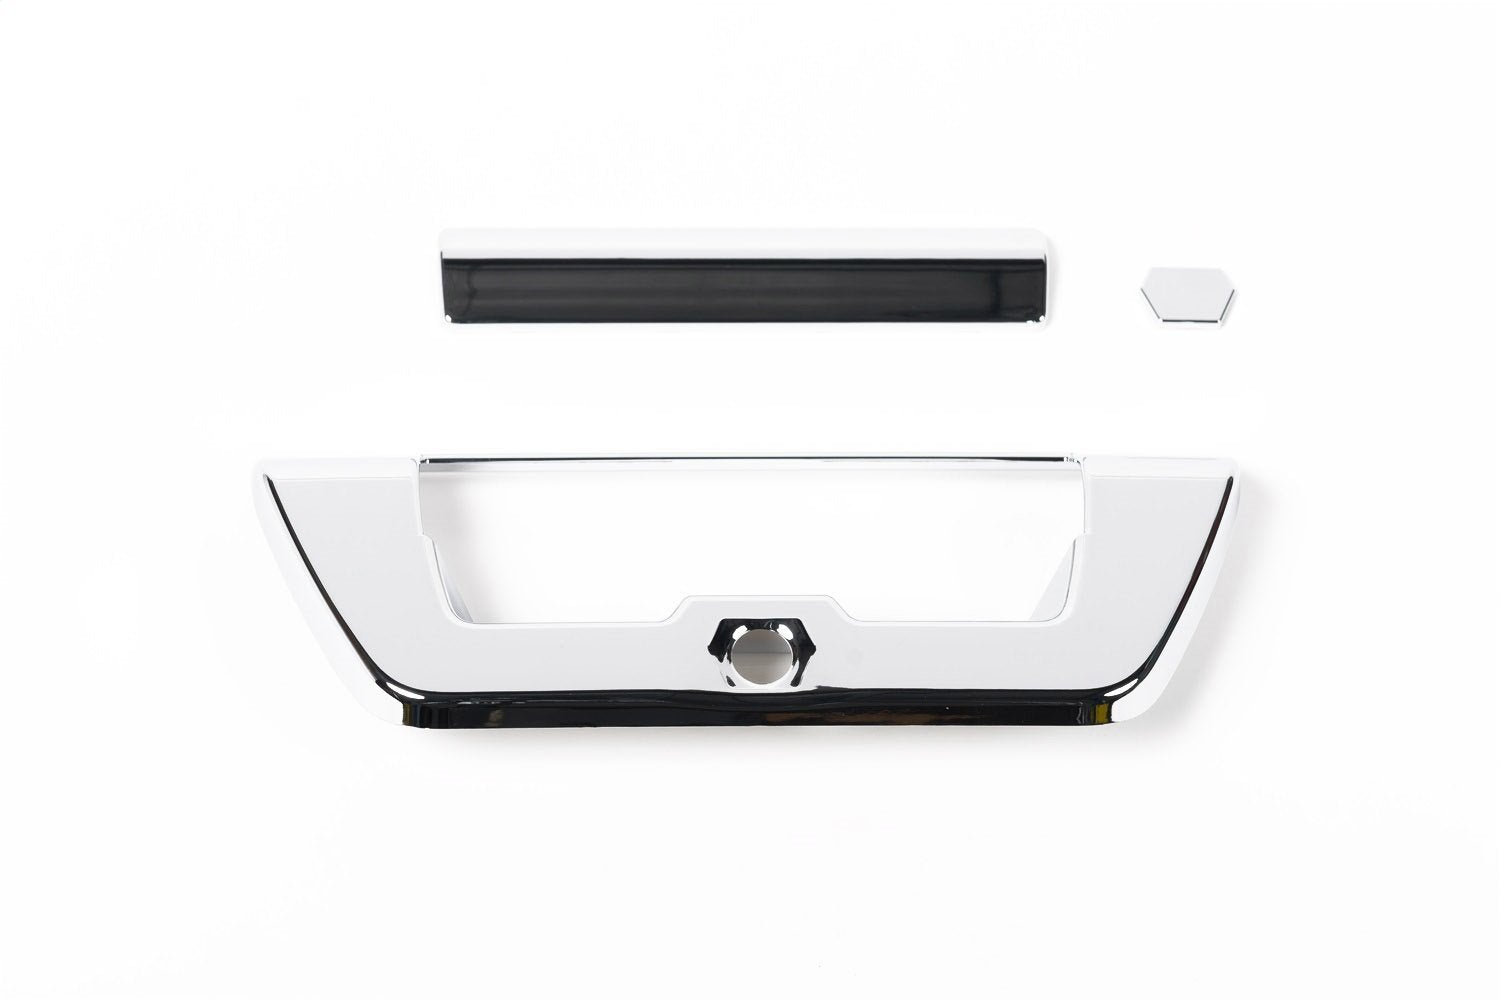 Putco 401068 Tailgate Handle Cover For Ford F-150, Chrome